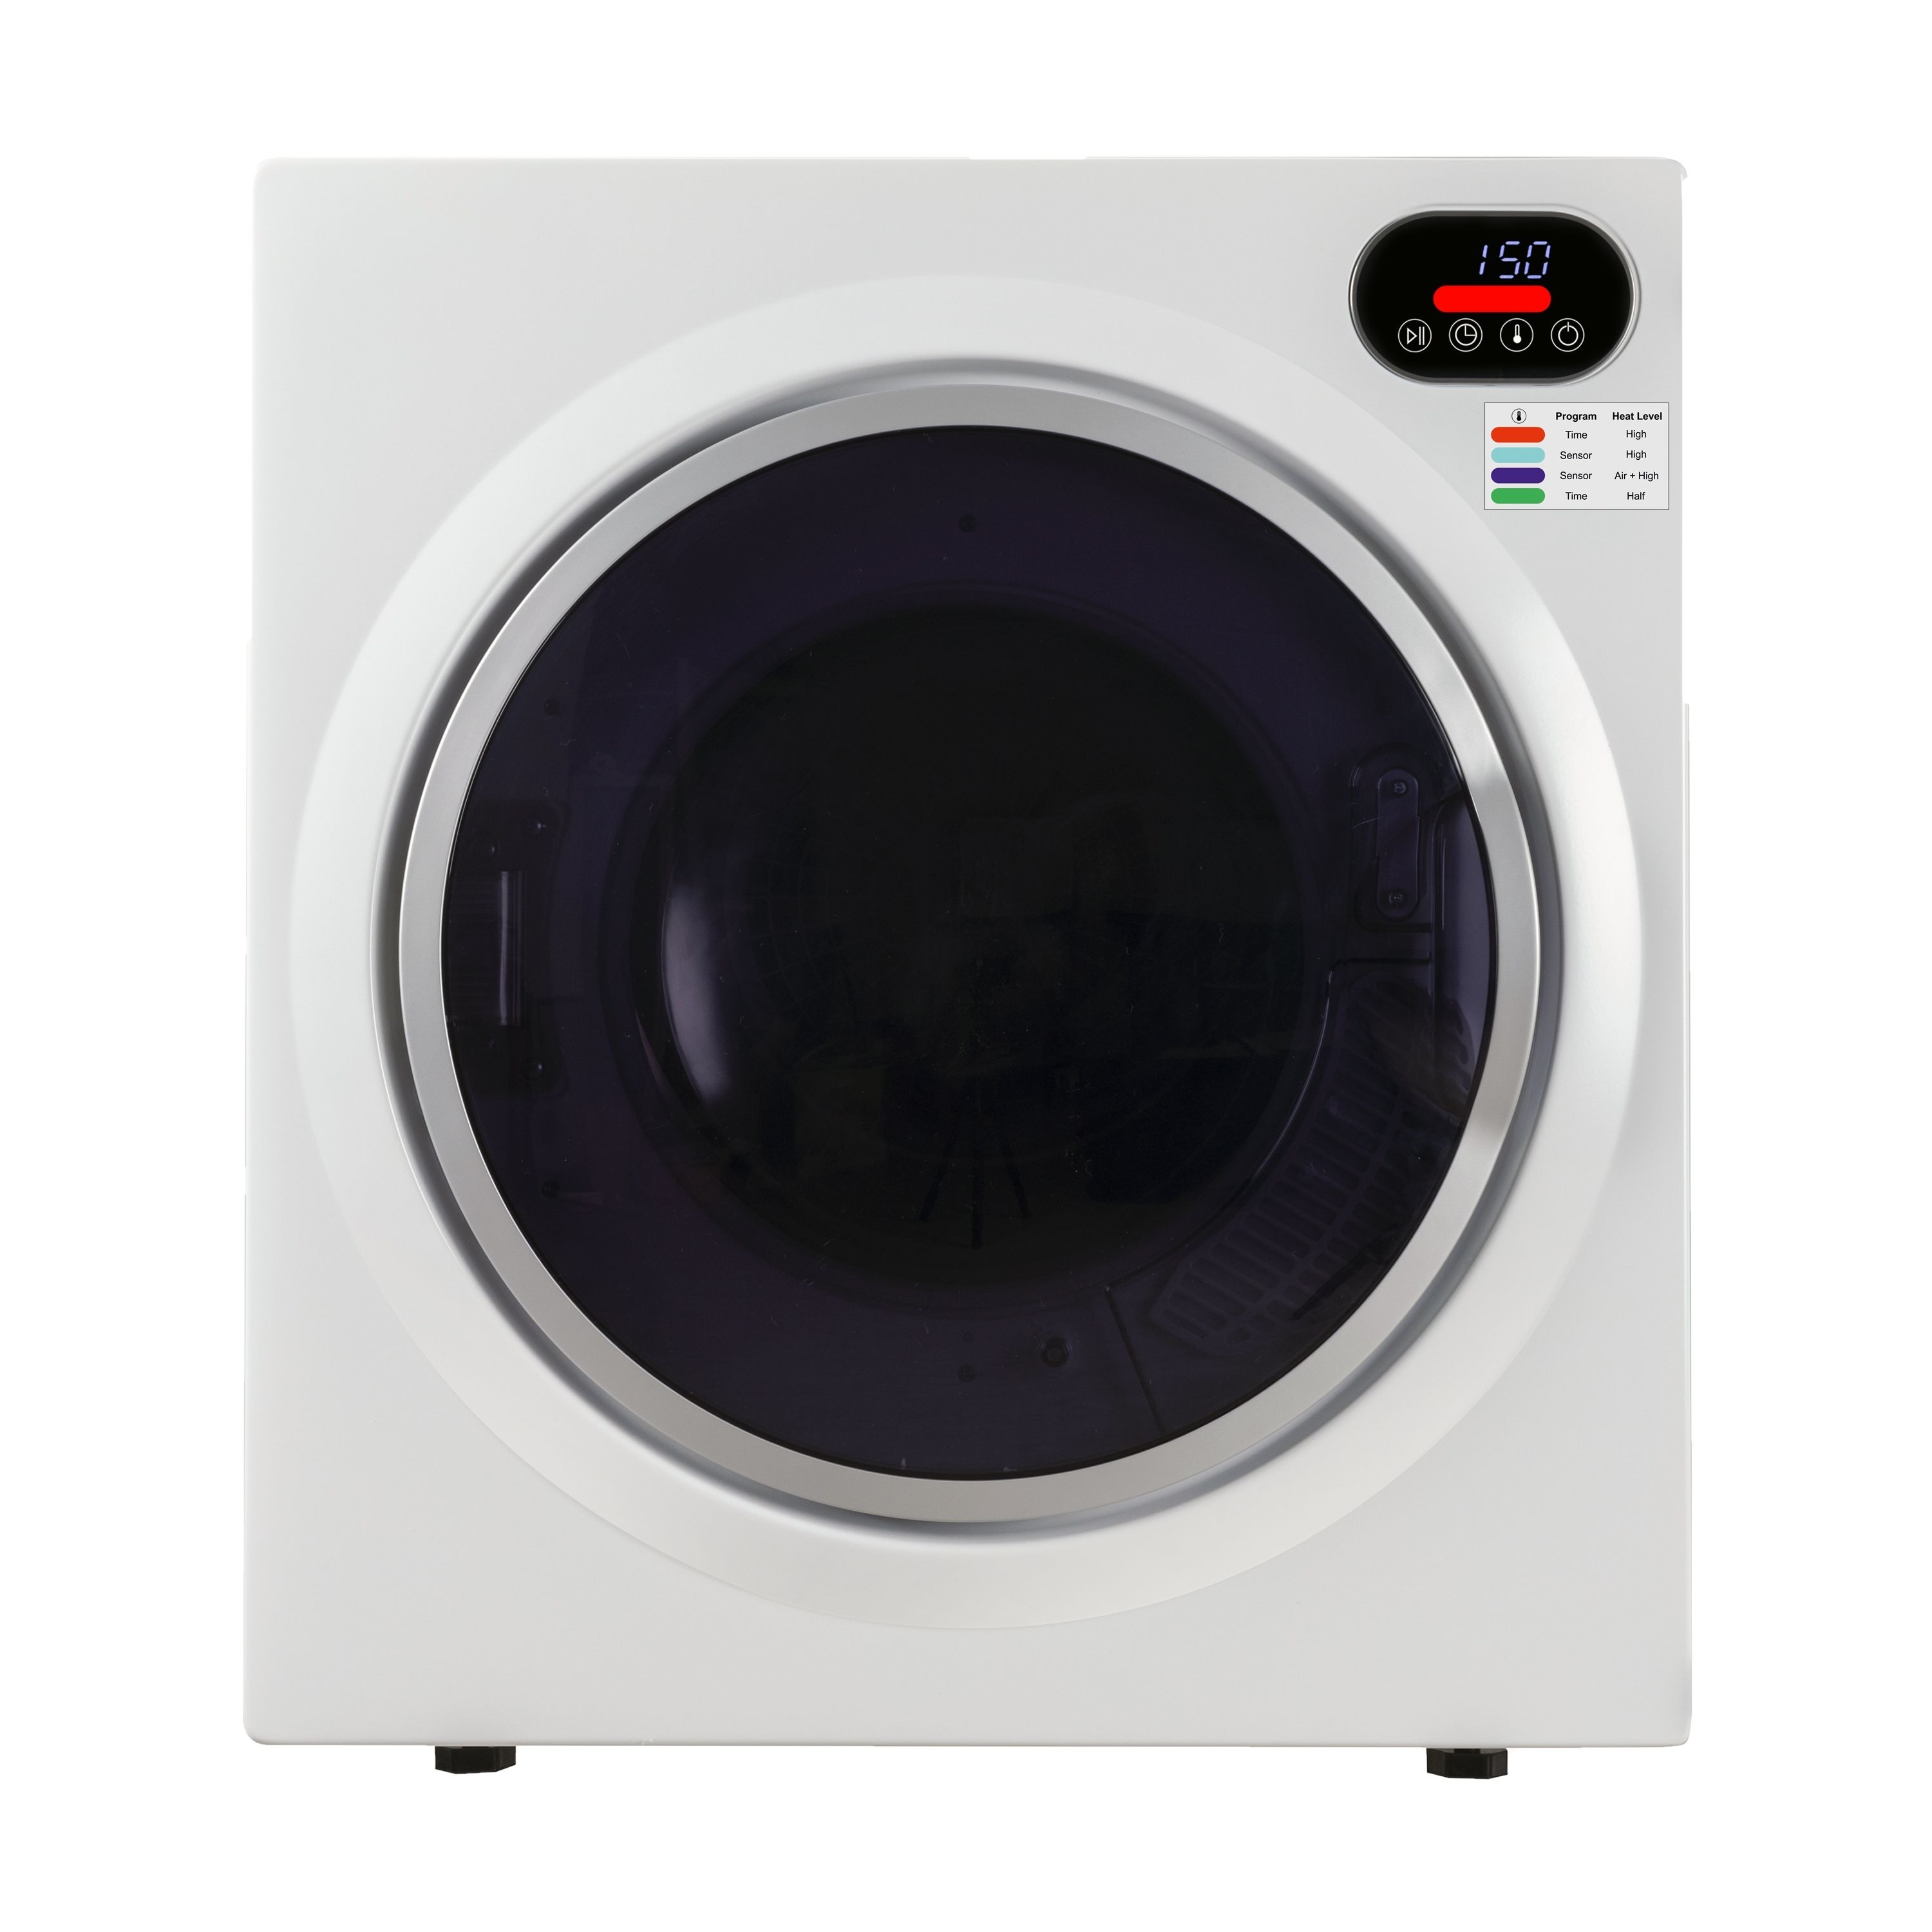 https://ak1.ostkcdn.com/images/products/is/images/direct/51ef9b0fcdc6cfd2989bdb0c64cc48ce2d1e99e1/2.6-cu.ft.-Compact-Digital-Dryer-in-White.jpg